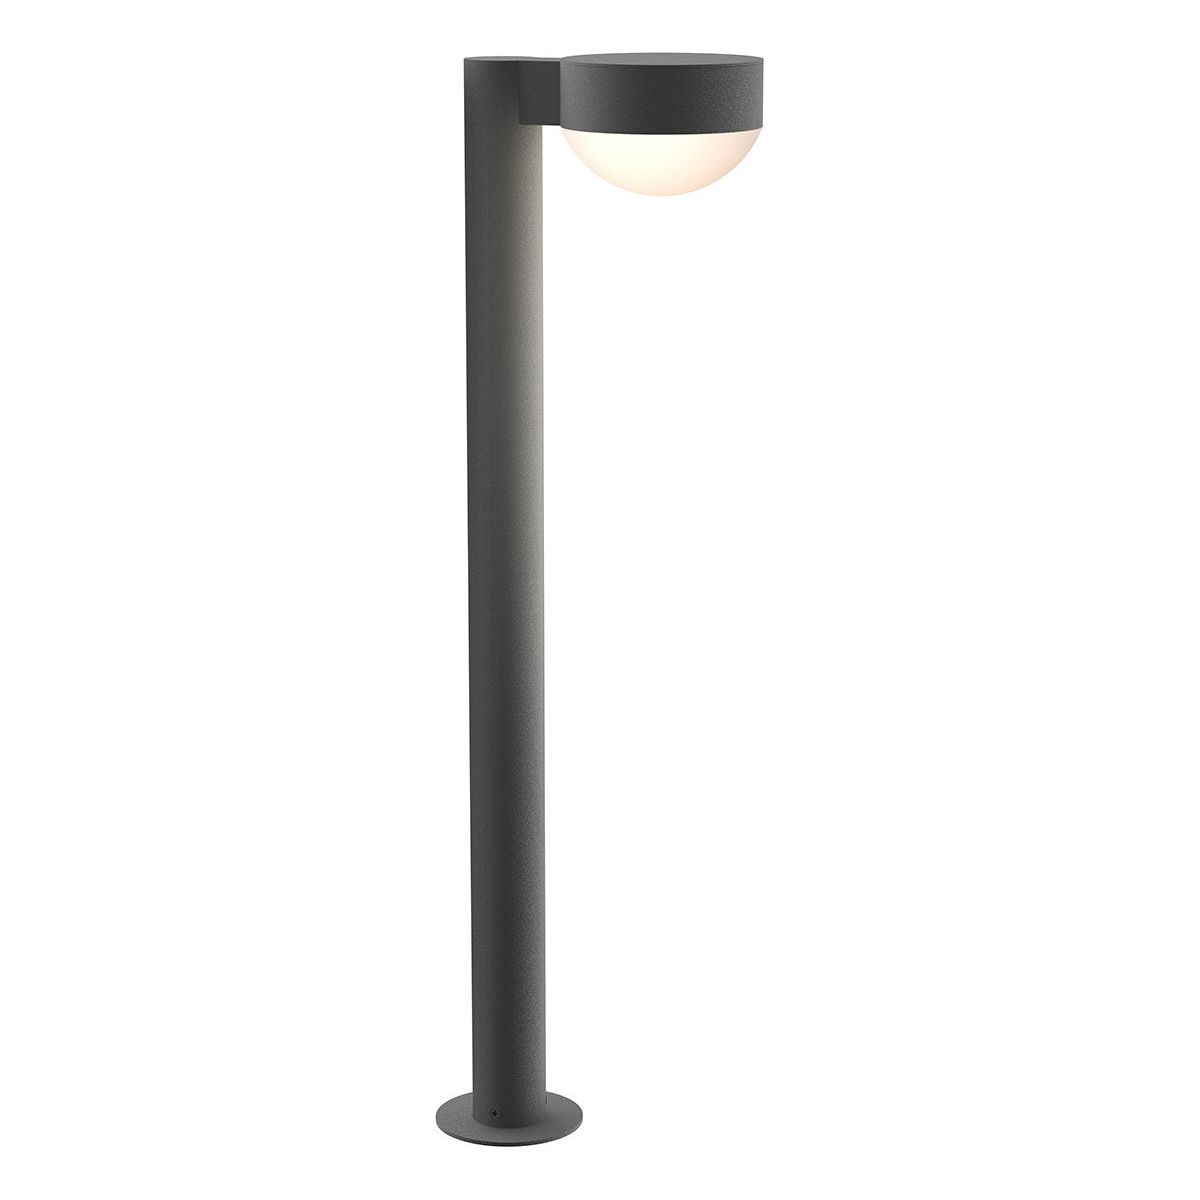 REALS 28" LED Bollard with Plate Cap and Dome Lens